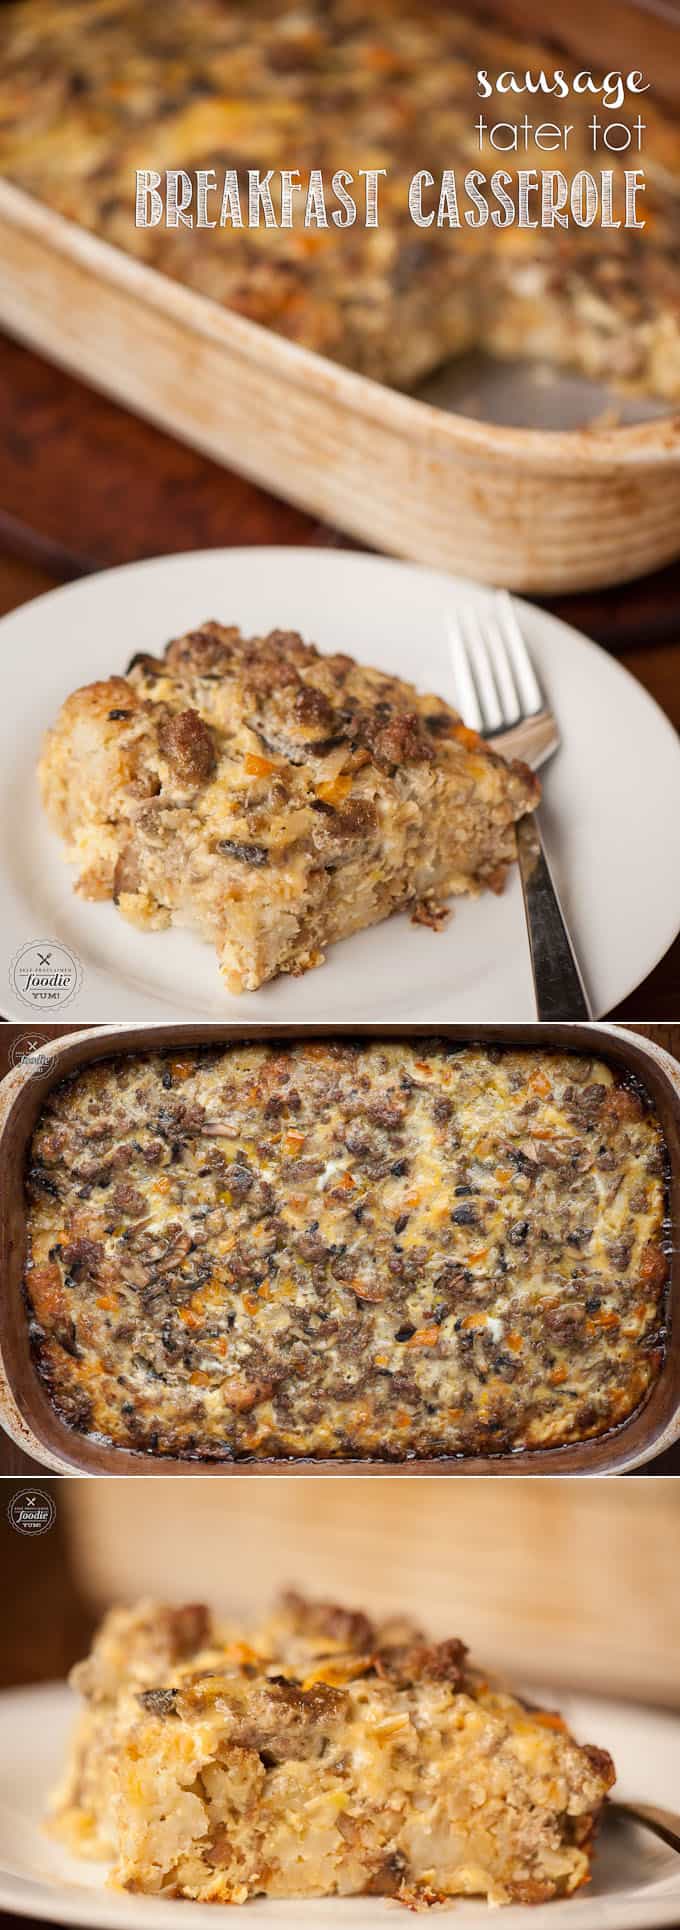 This Sausage Tater Tot Breakfast Casserole is the perfect weekend breakfast any time of year, but my family especially loves it on holiday mornings.